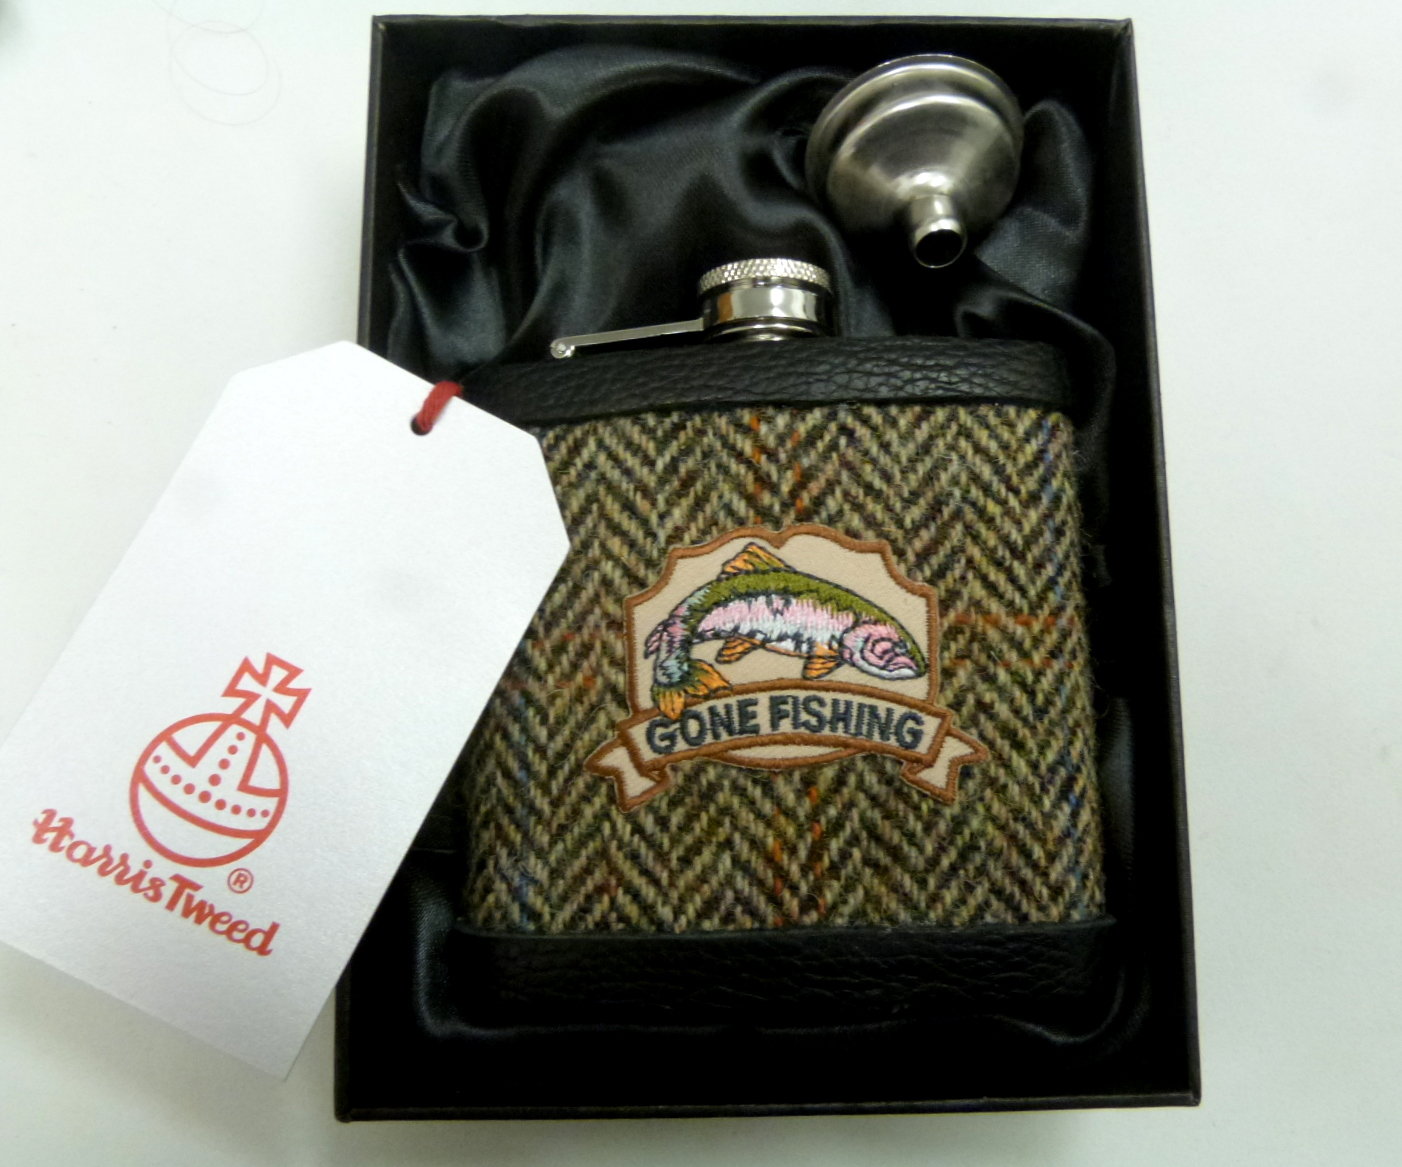 Harris Tweed hip flask embellished Gone Fishing, fisherman's gift, ideal for Dad, Father's Day, birthday, Christmas.